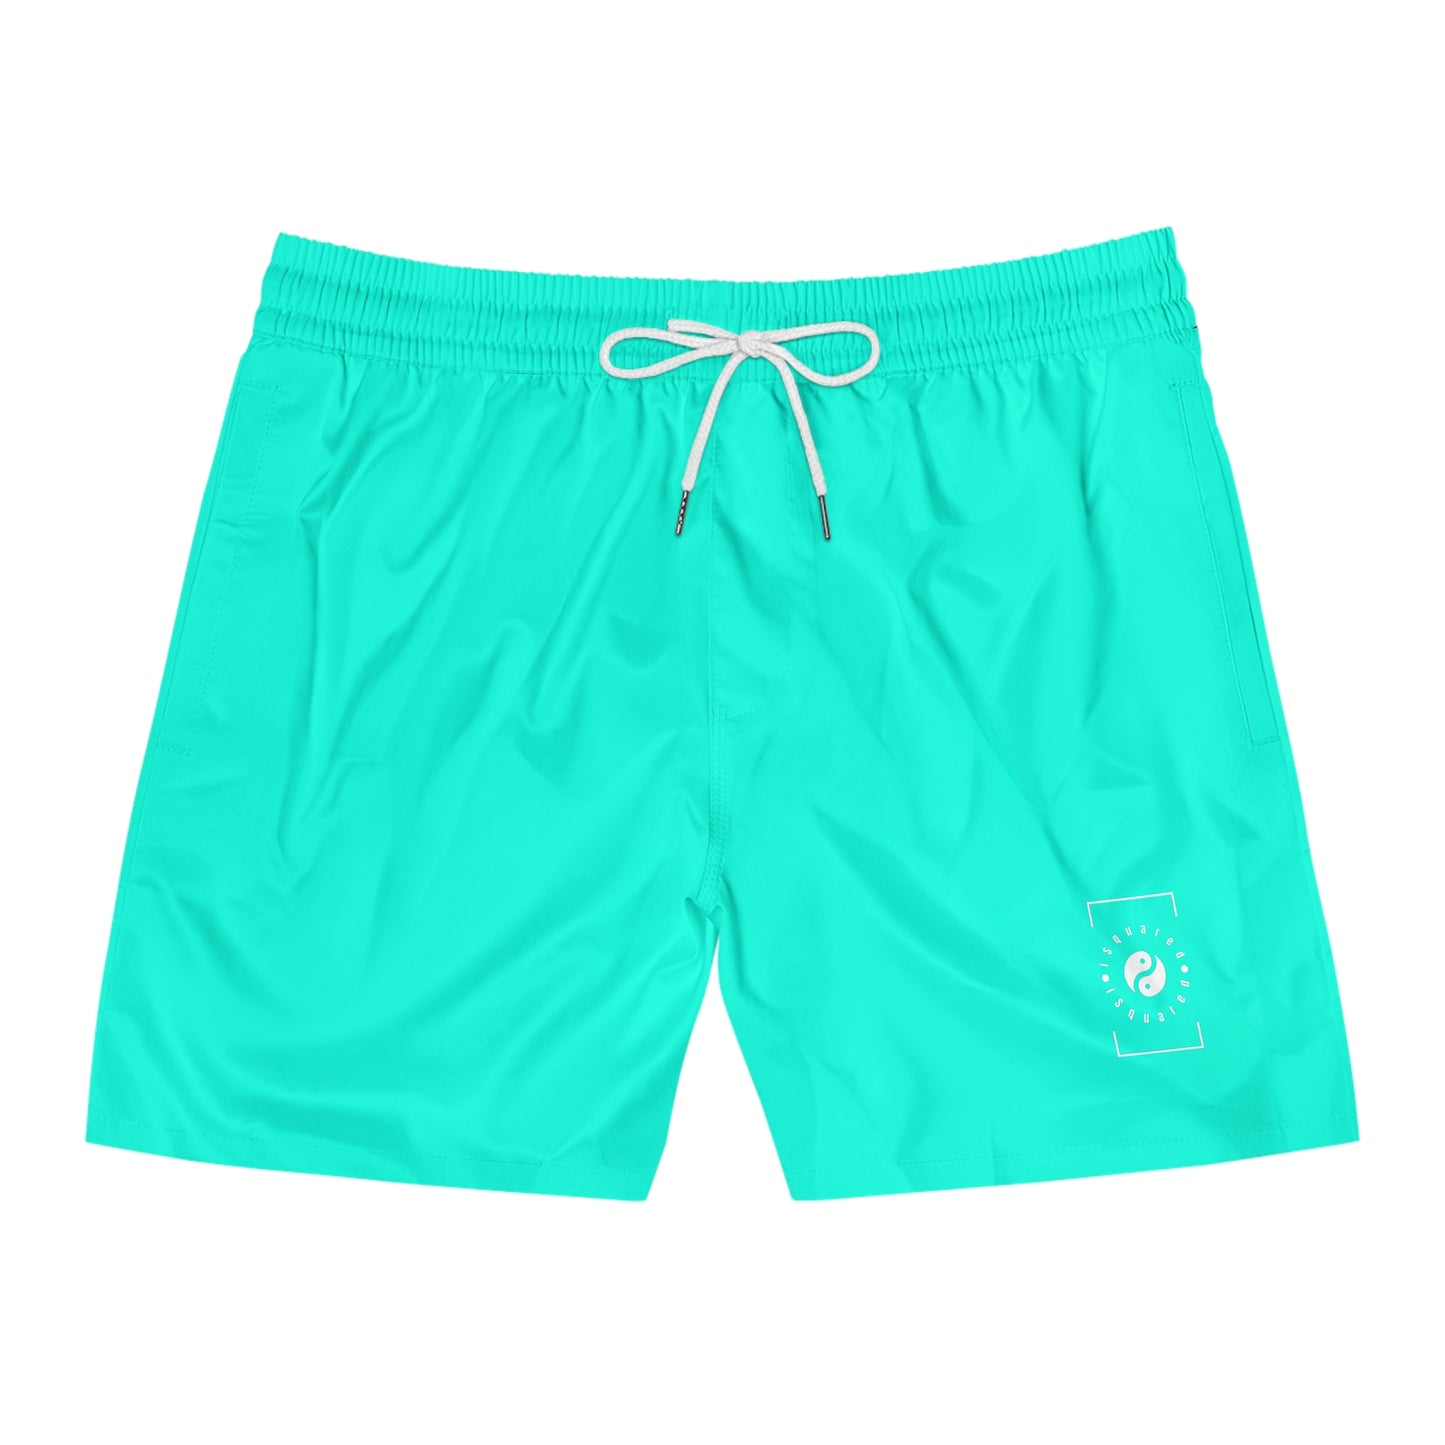 Neon Teal #11ffe3 - Swim Shorts (Solid Color) for Men